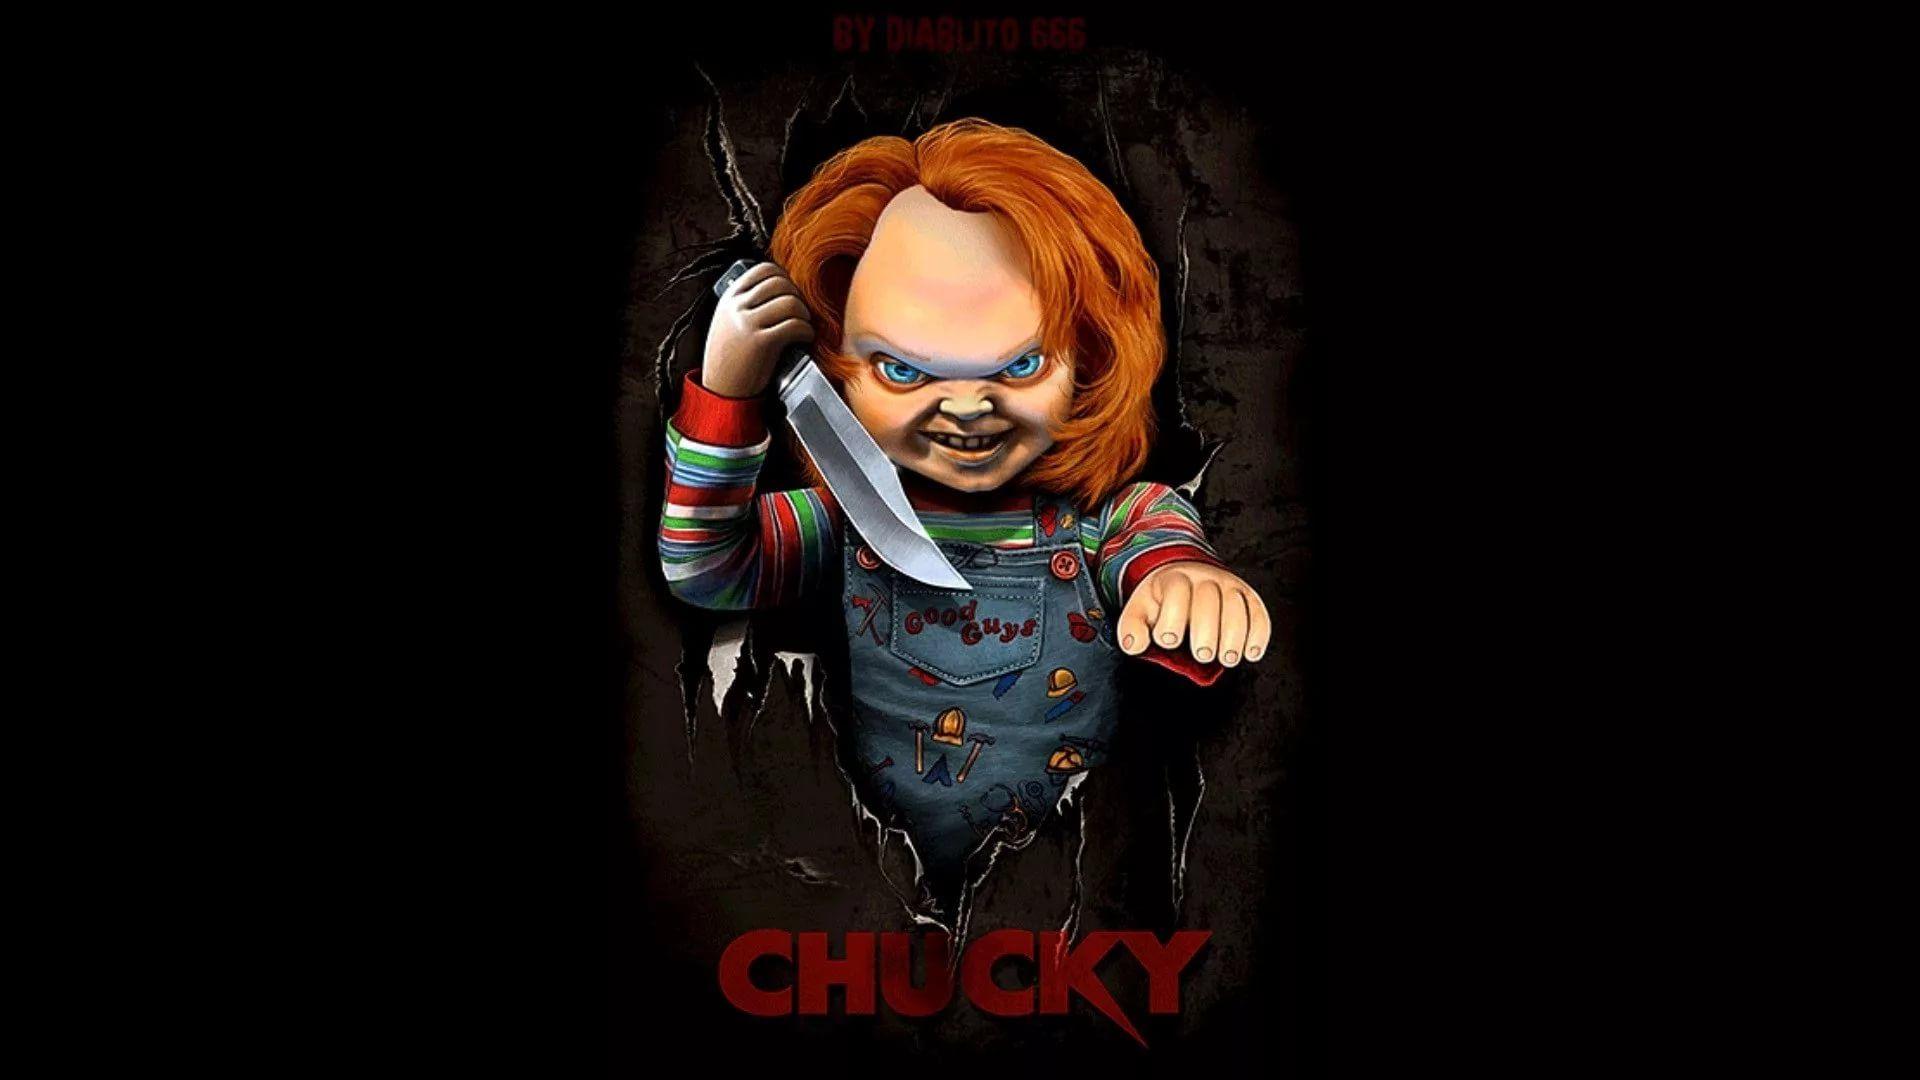 bride of chucky free online streaming